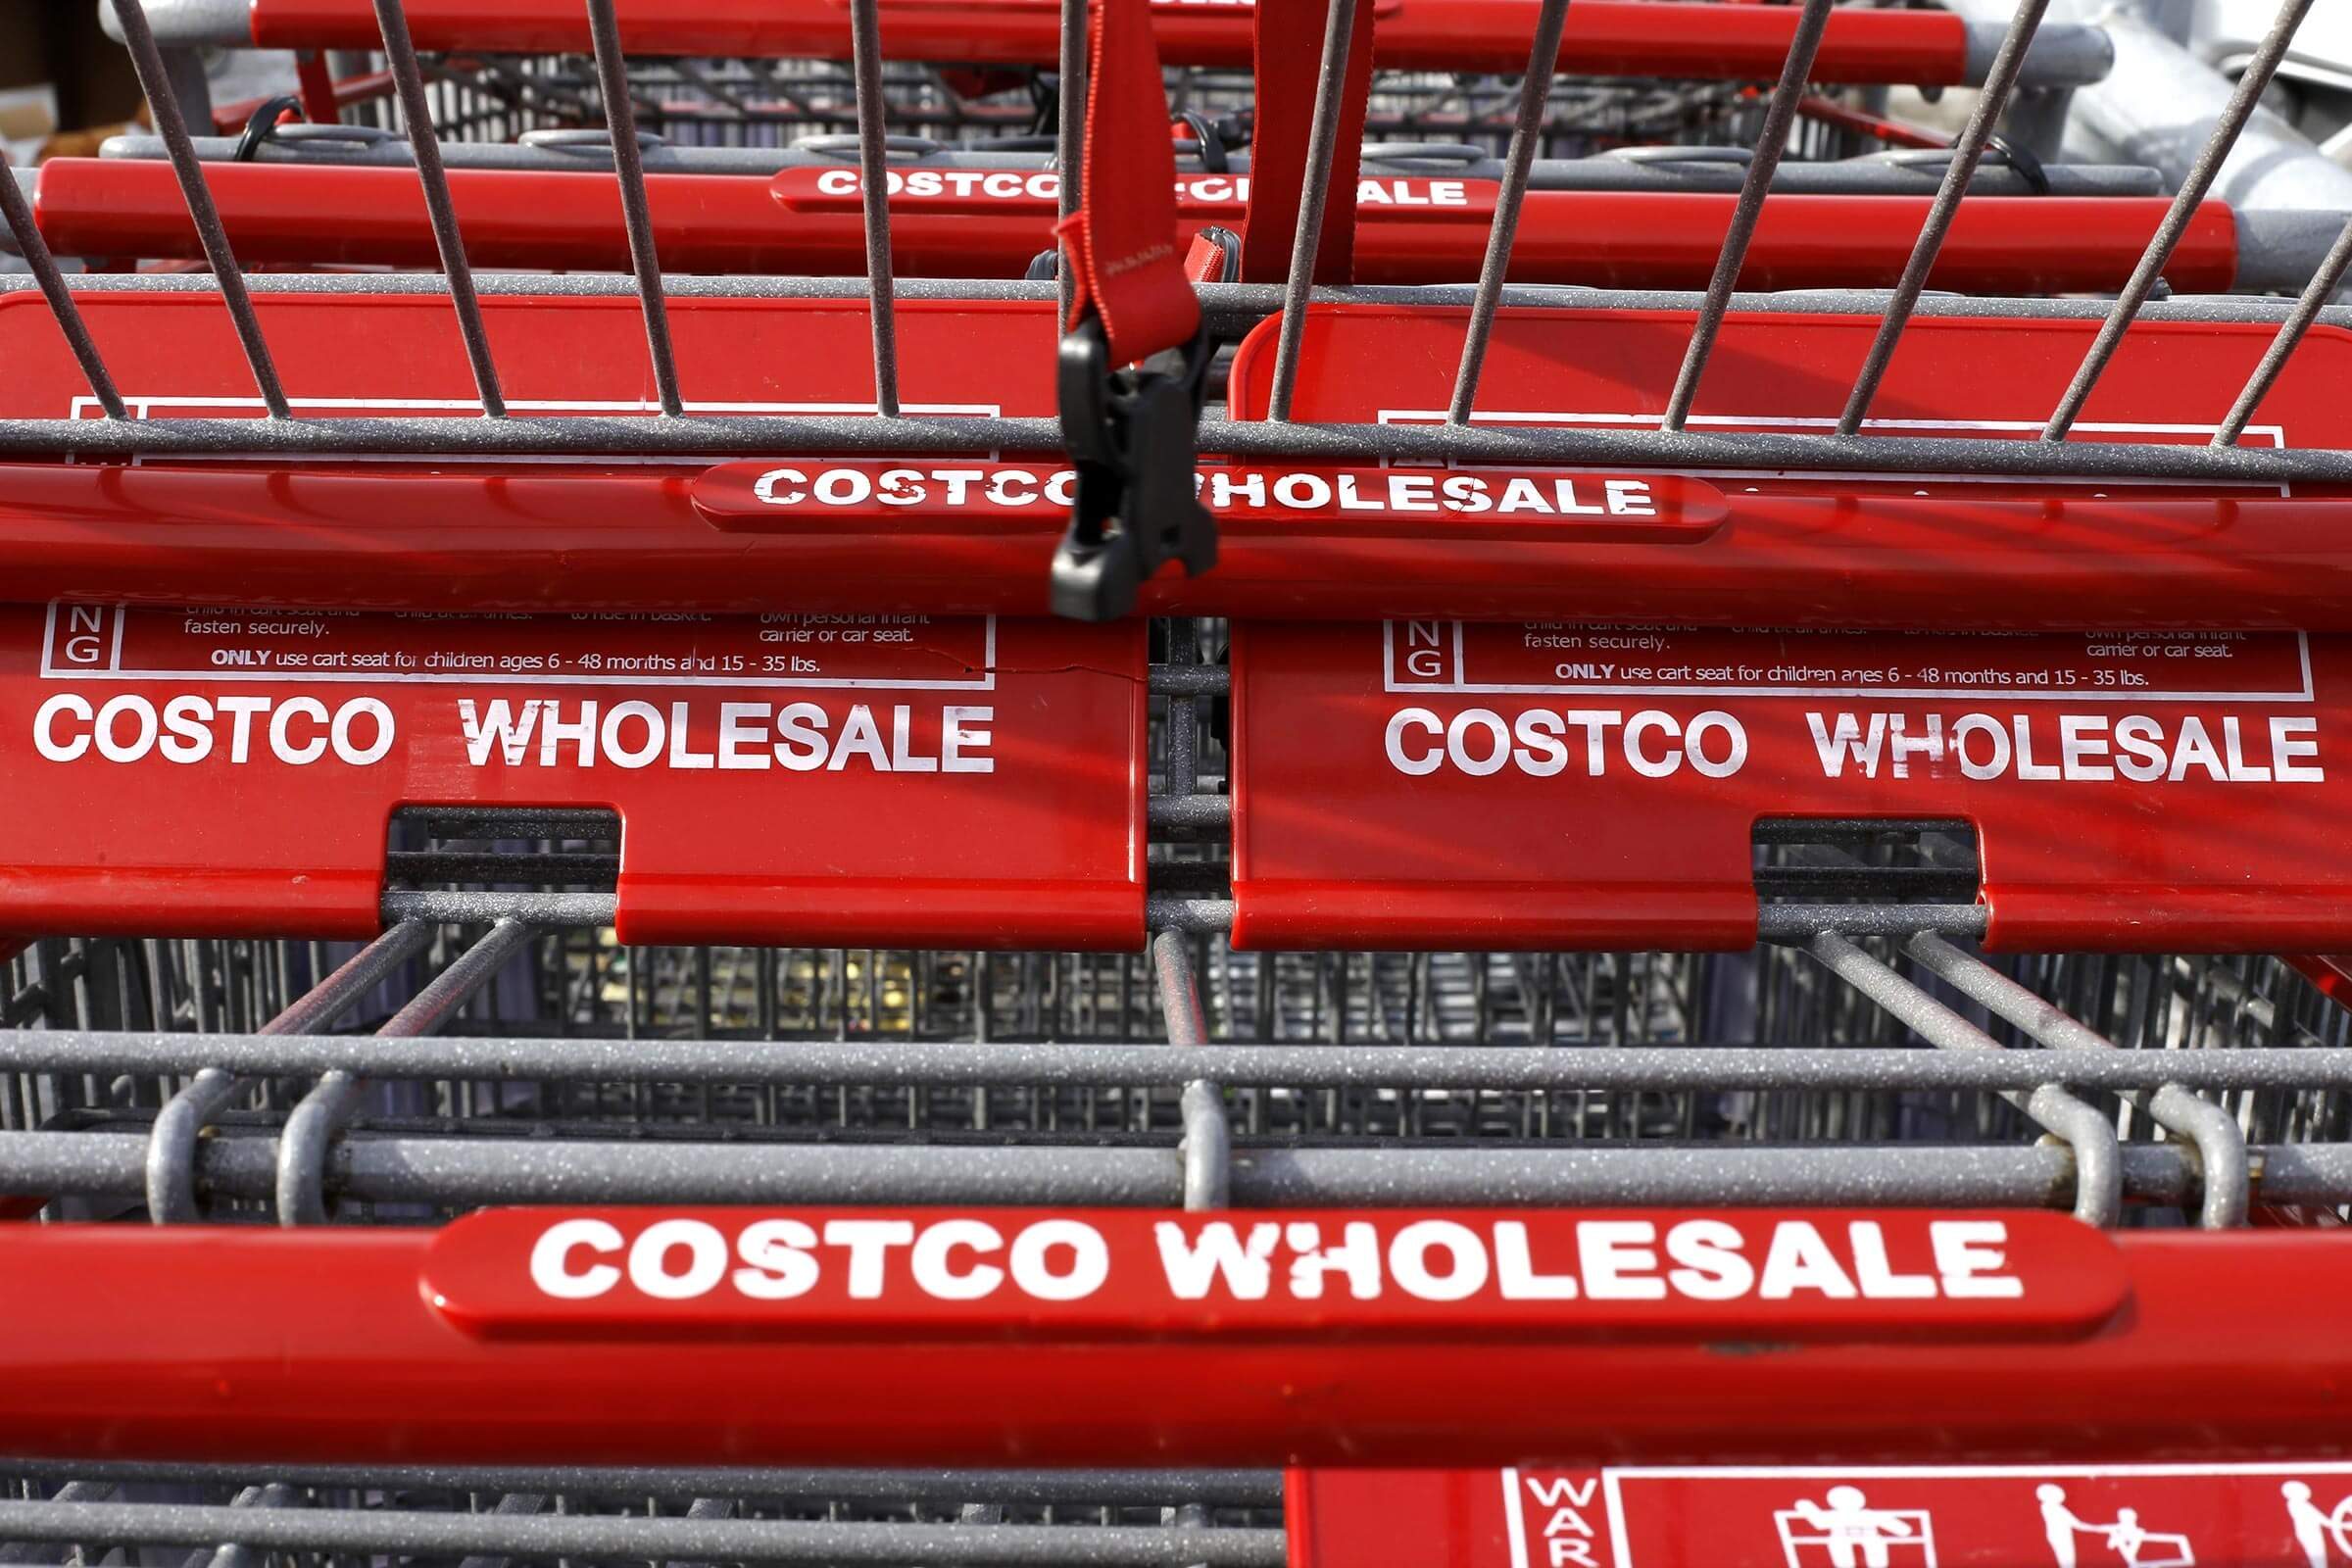 Costco Membership Rules And How To Shop Without A Membership - MTL